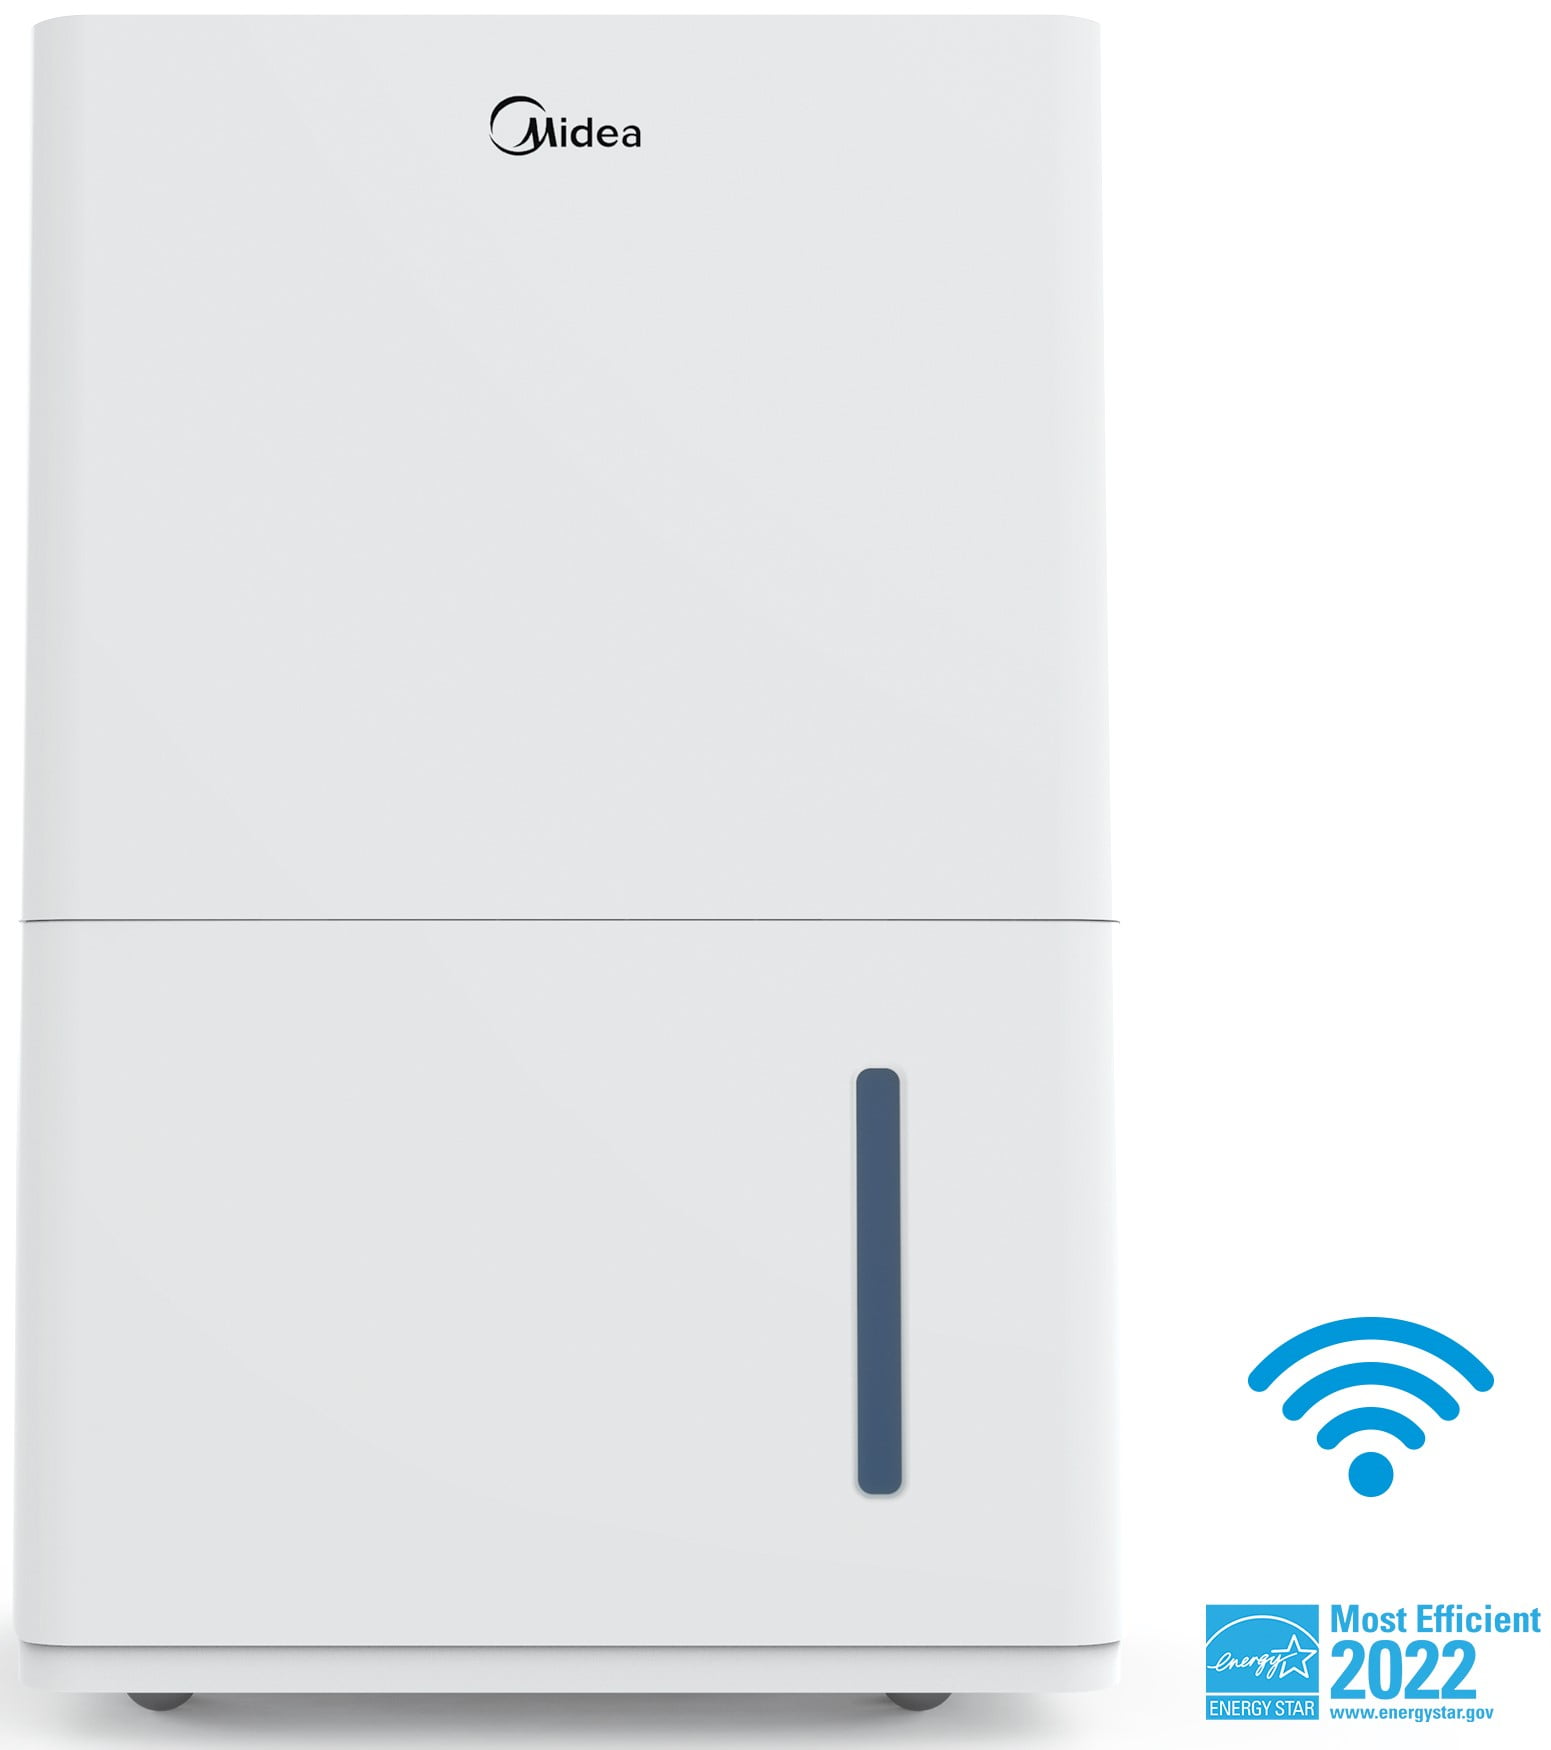 Midea 35-Pint Energy Star Smart Dehumidifier for Very Damp Rooms, White, MAD35S1WWT